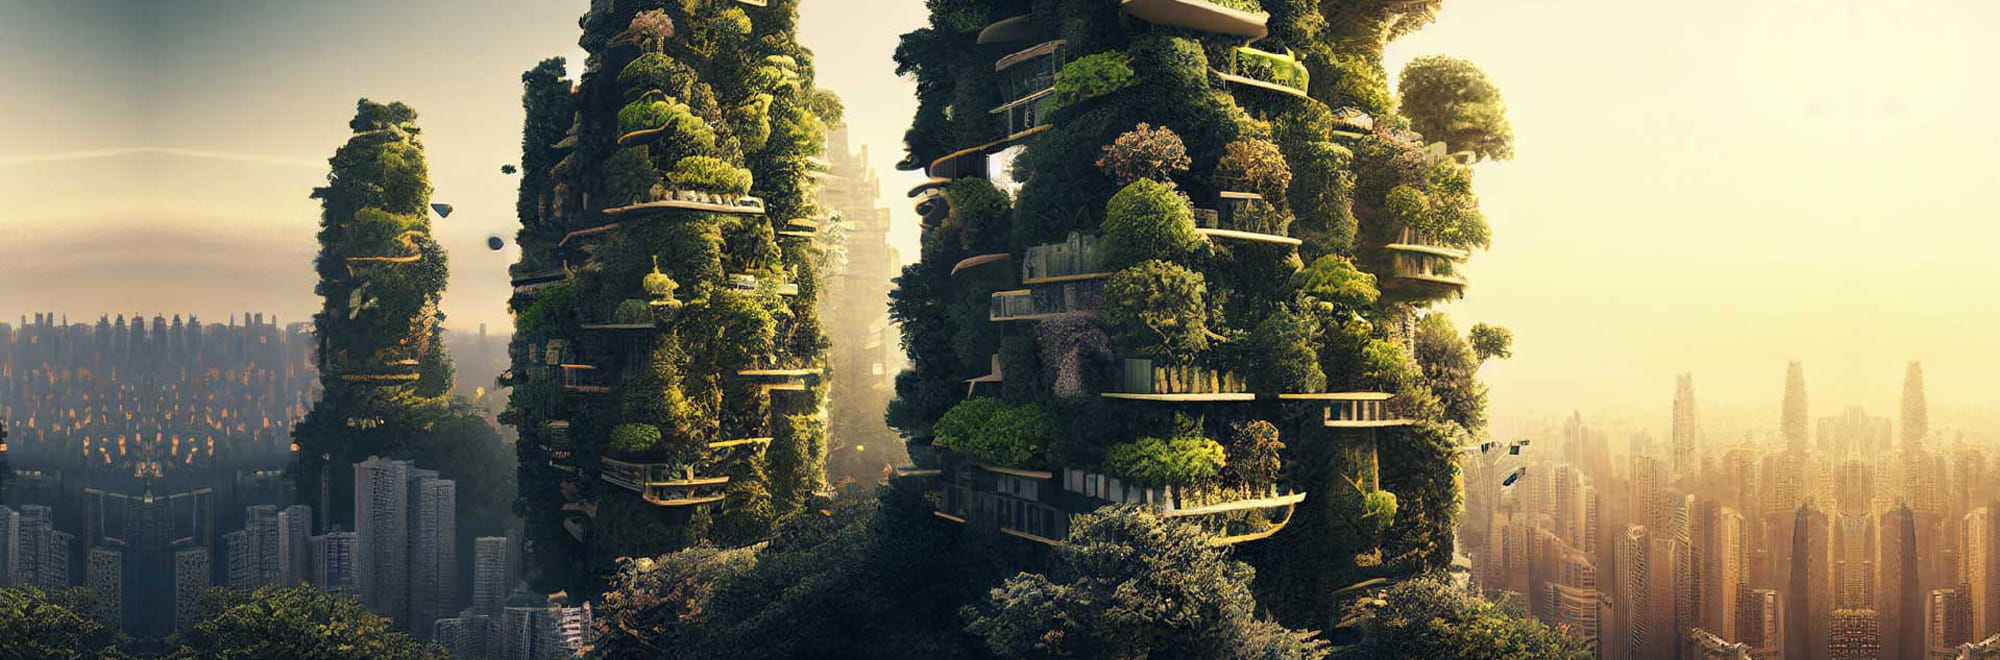 Should our buildings ‘get outside’ more?